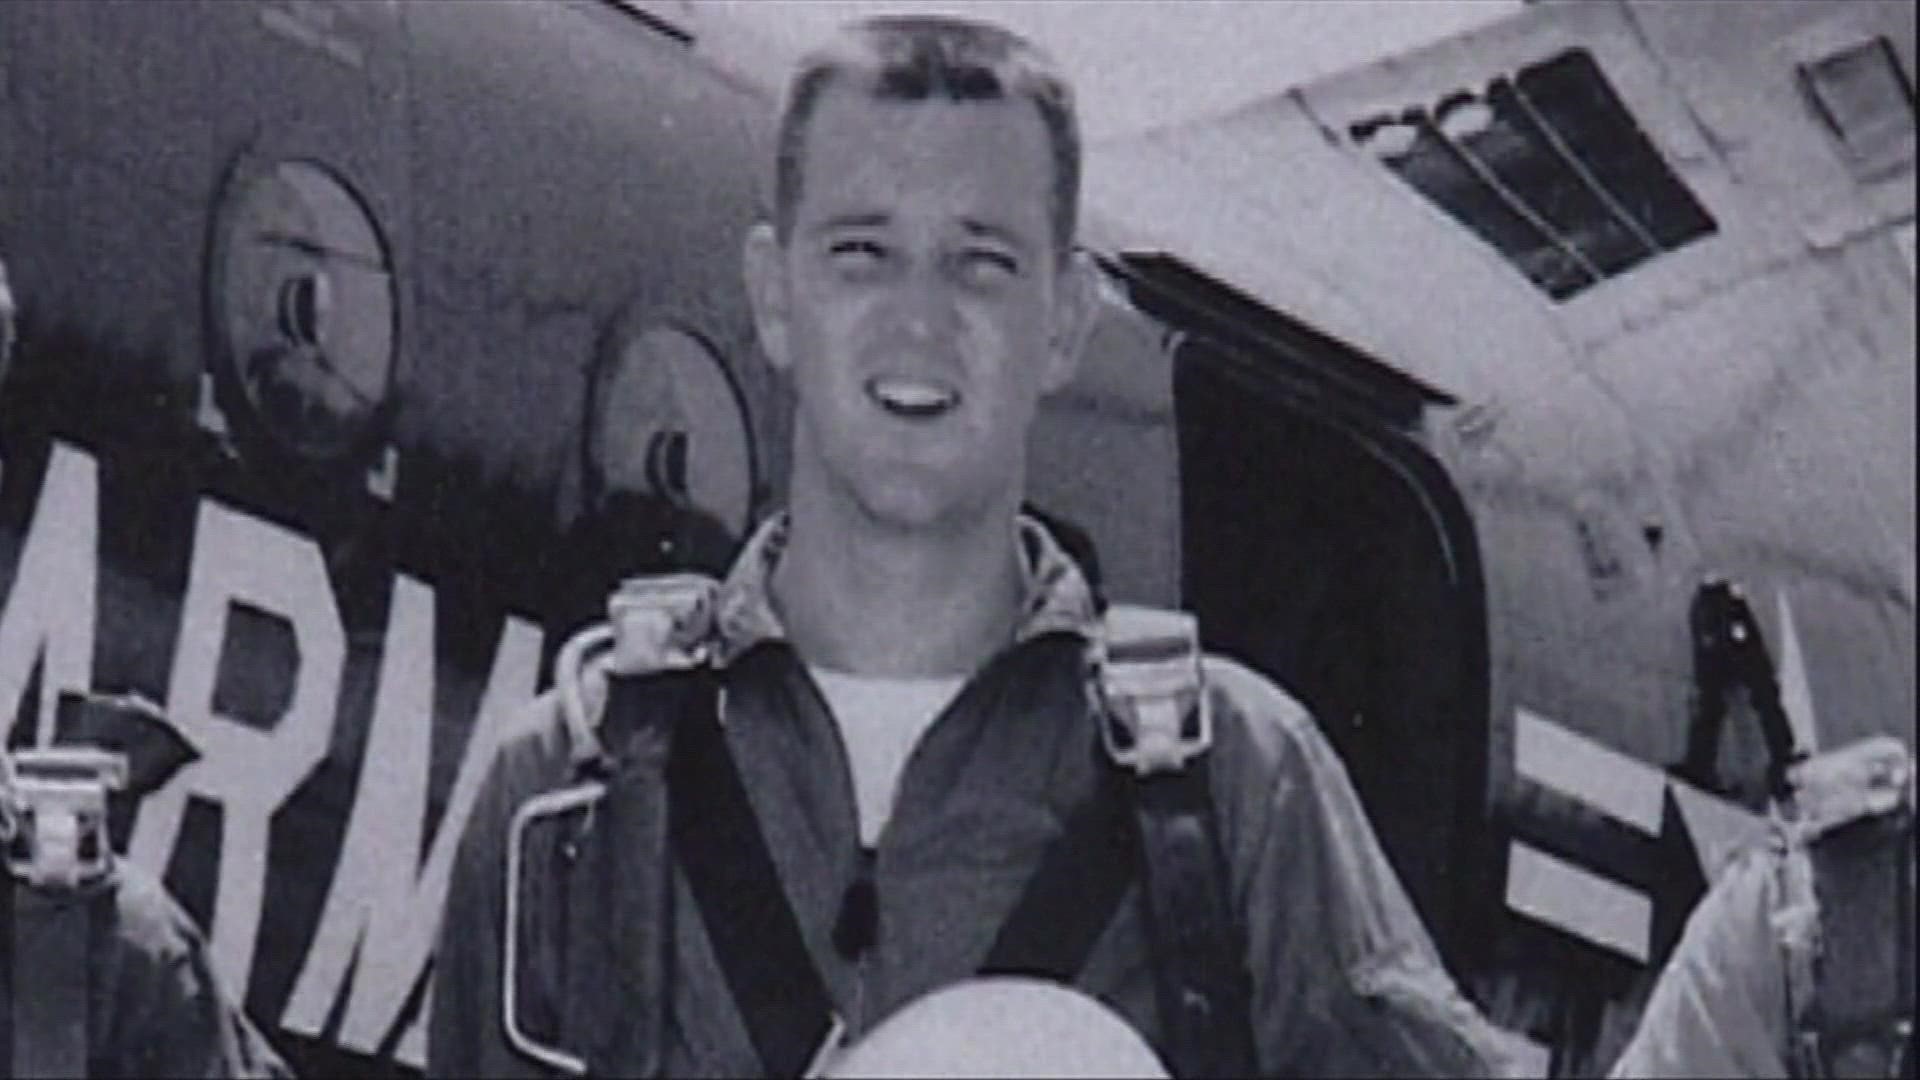 The Army Golden Knights parachute unit started with skydivers who pushed altitude and free-fall limits in the late 1950s.  Dick Fortenberry was an original member.